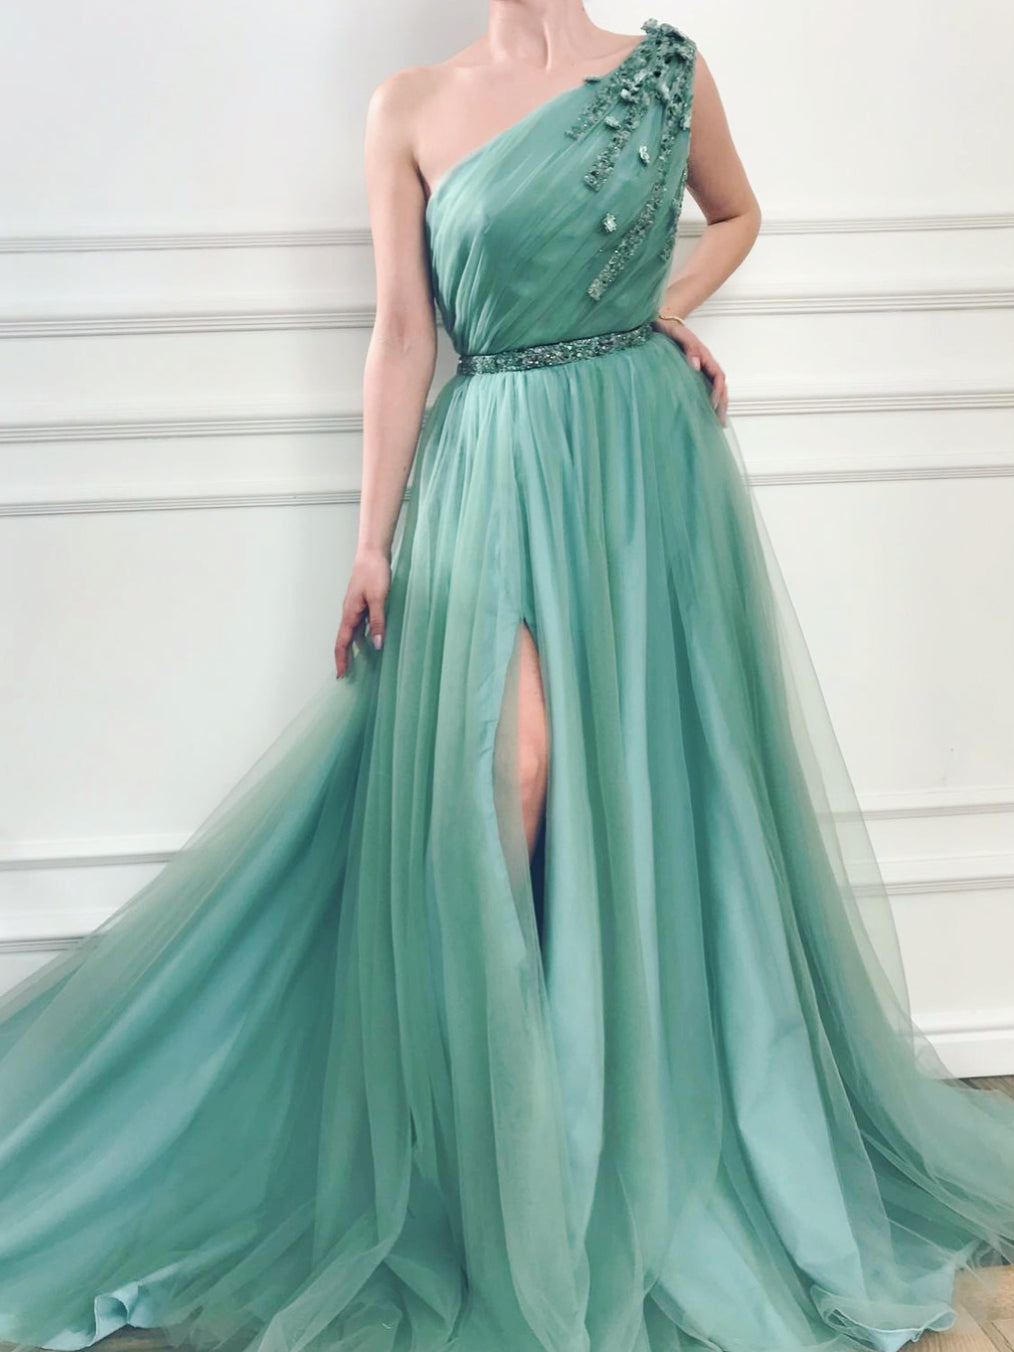 One Shoulder Prom Dresses with Deep Slit Aline Beaded Sexy Long Simple Prom Dress JKL1645|Annapromdress